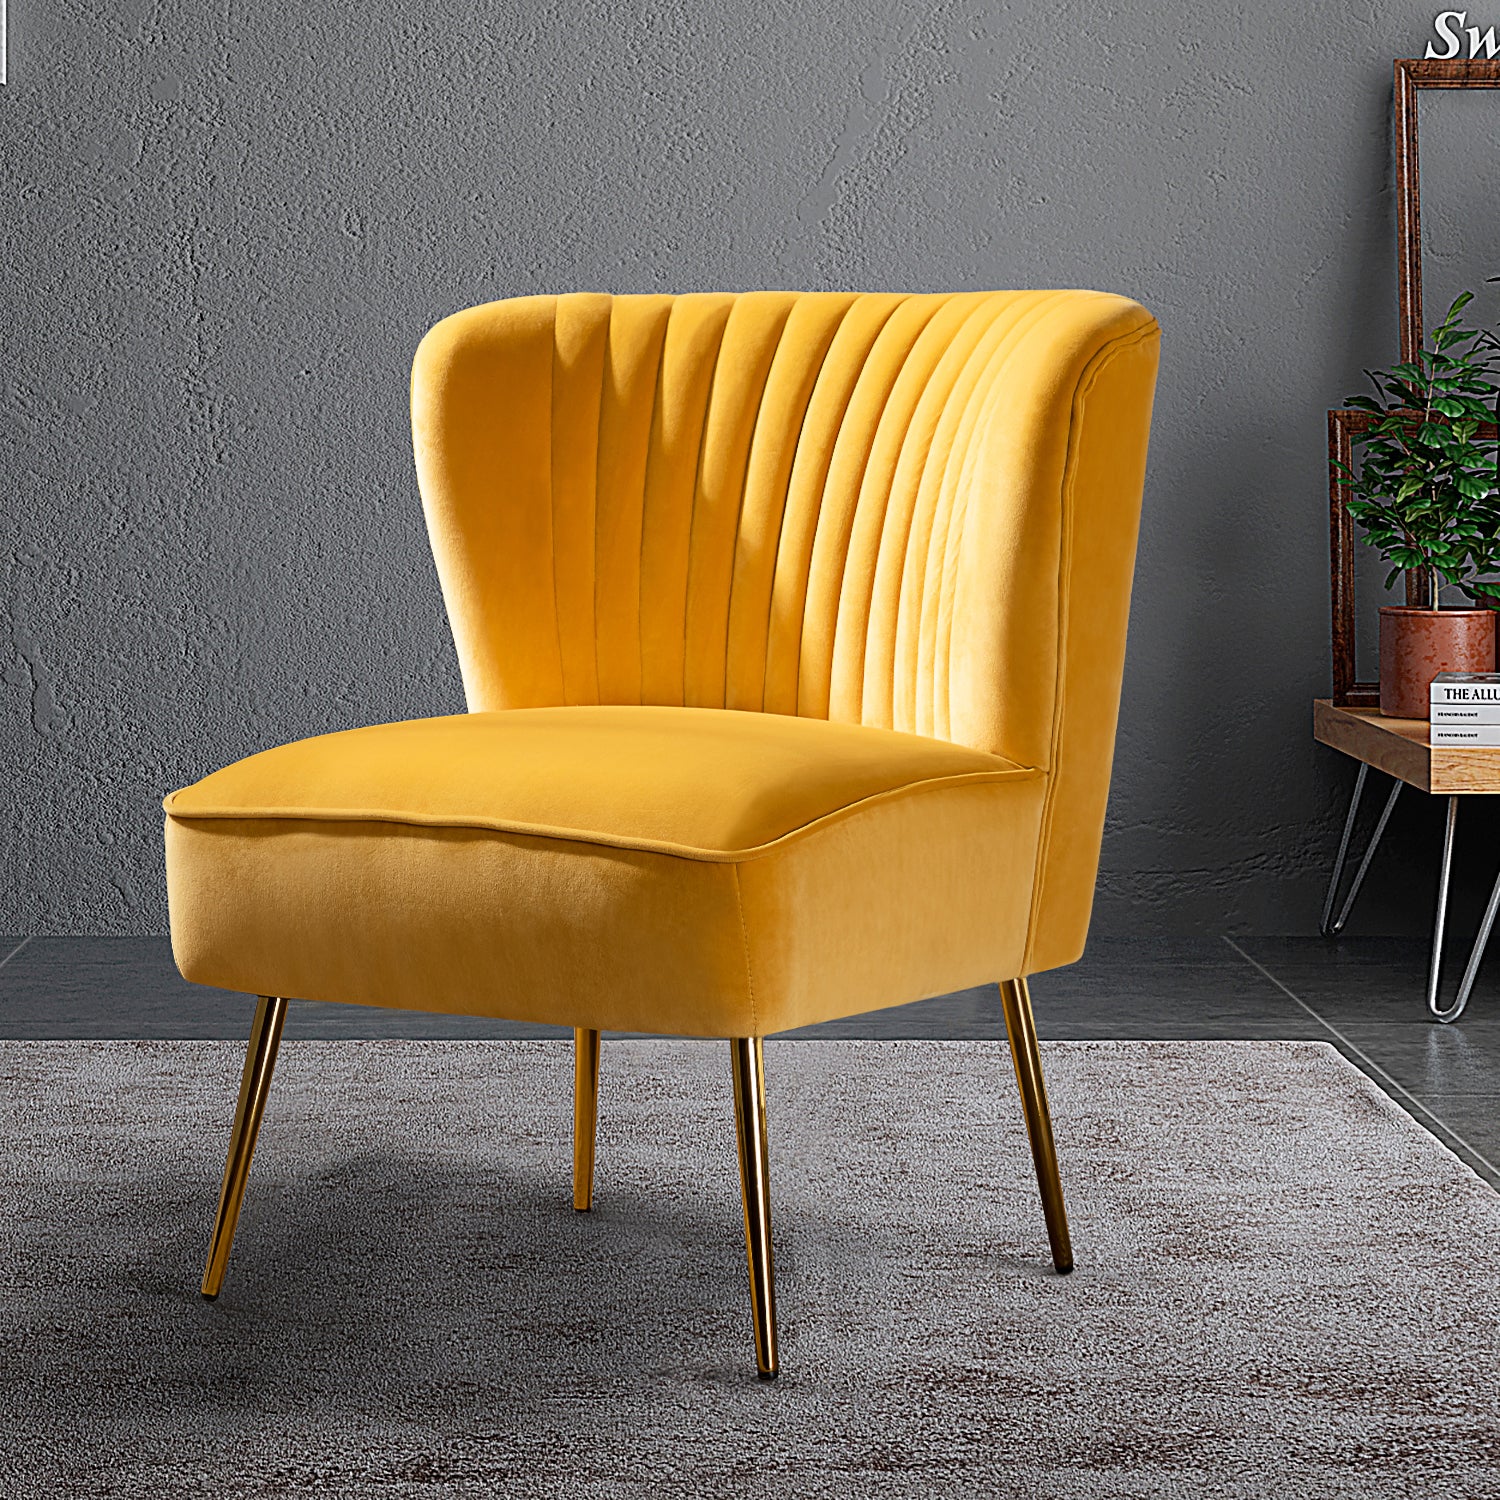 Cool Accent Chairs That Make a Statement